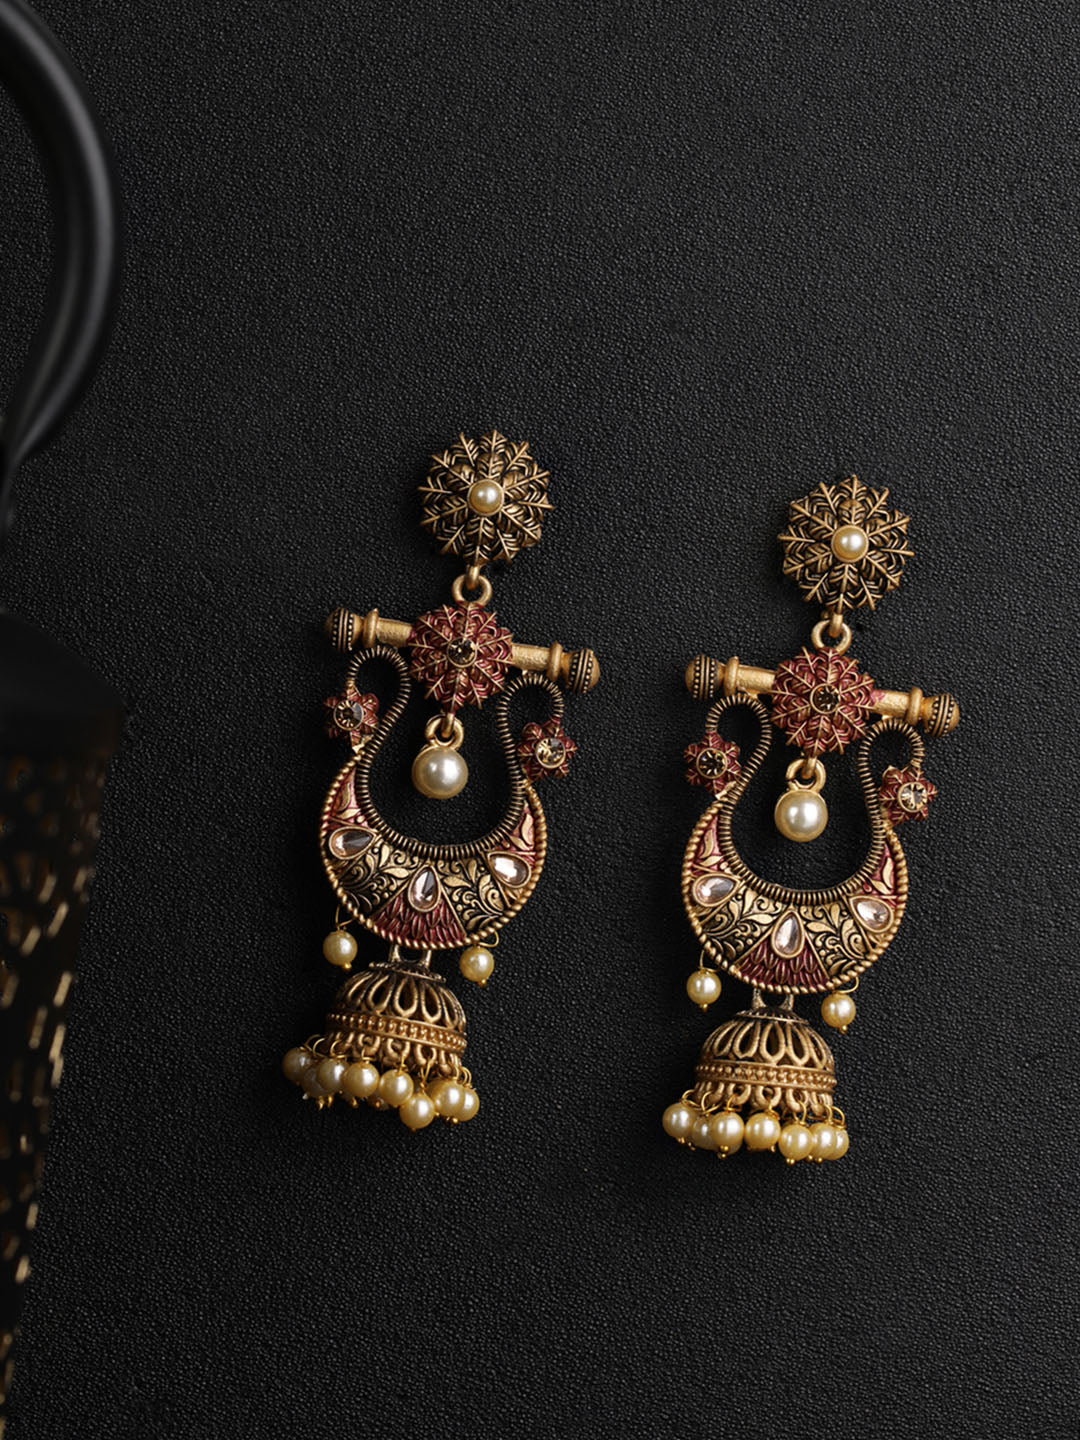 SHREEJI FASHION & JEWELLERY PRESENTS A NEW STYLE OF EARRINGS. HIGH GOLD  PLATED FANCY AND ROYAL